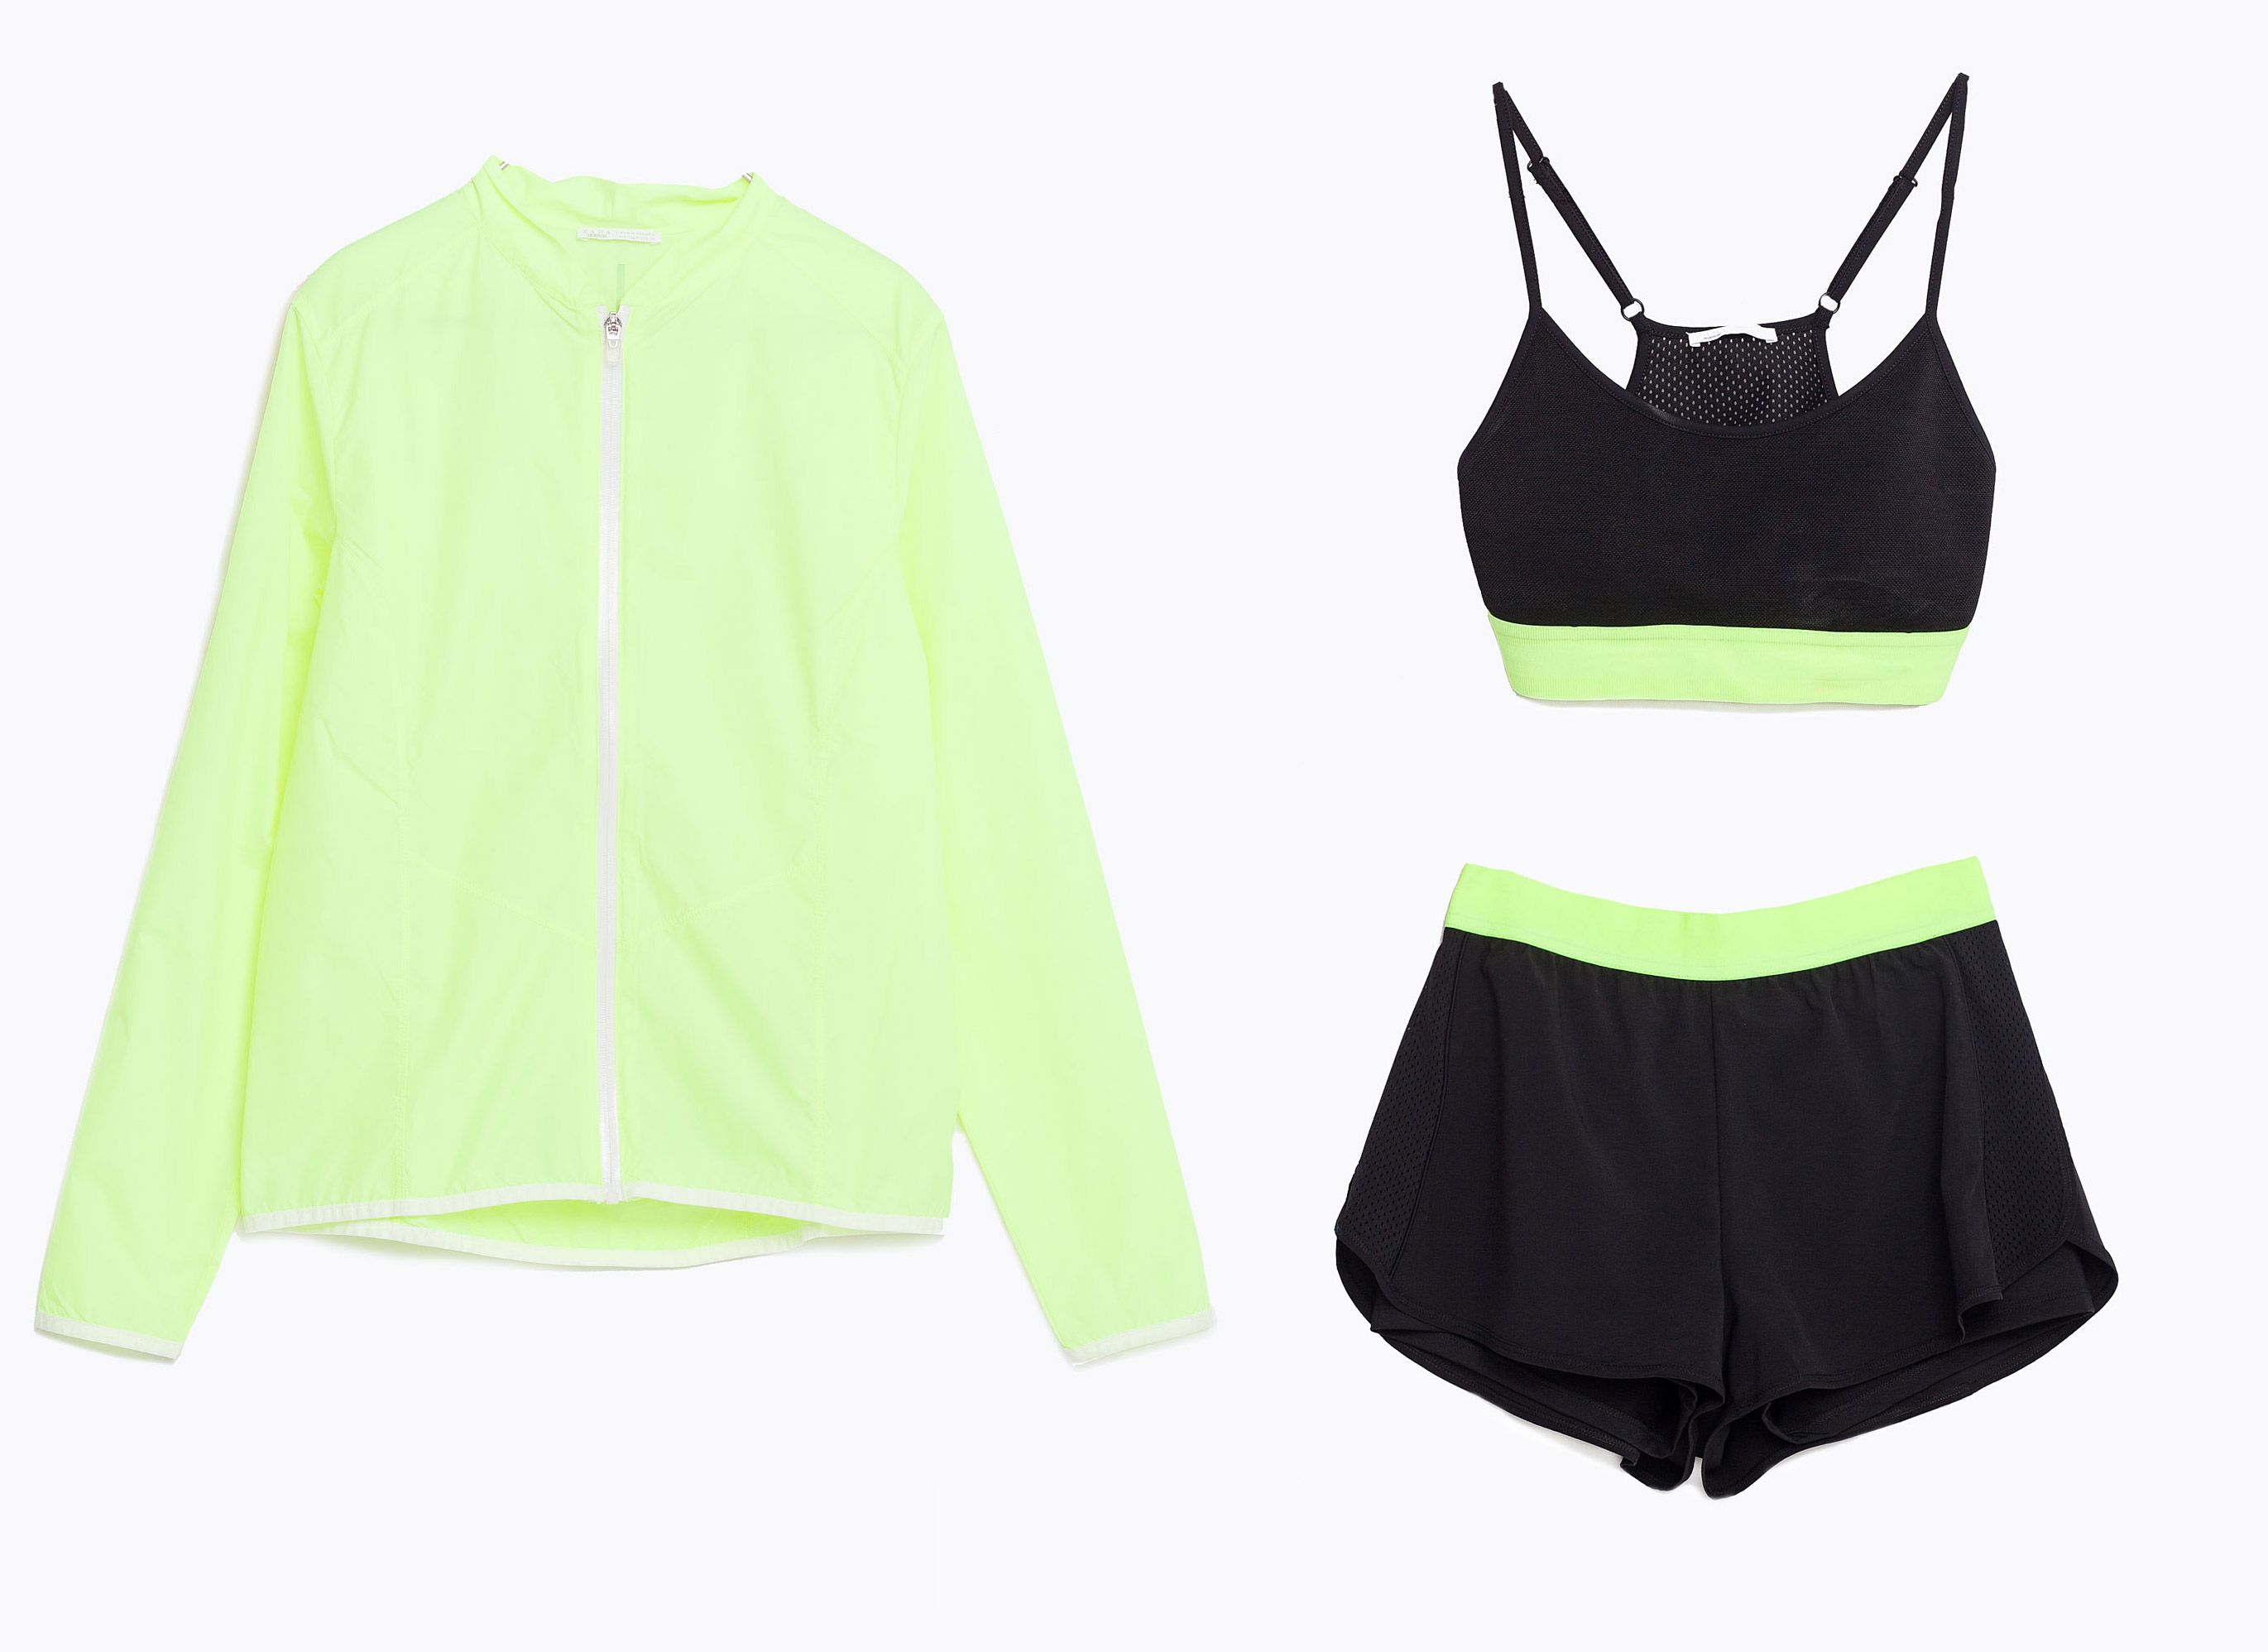 Zara are now making activewear and it's seriously nice